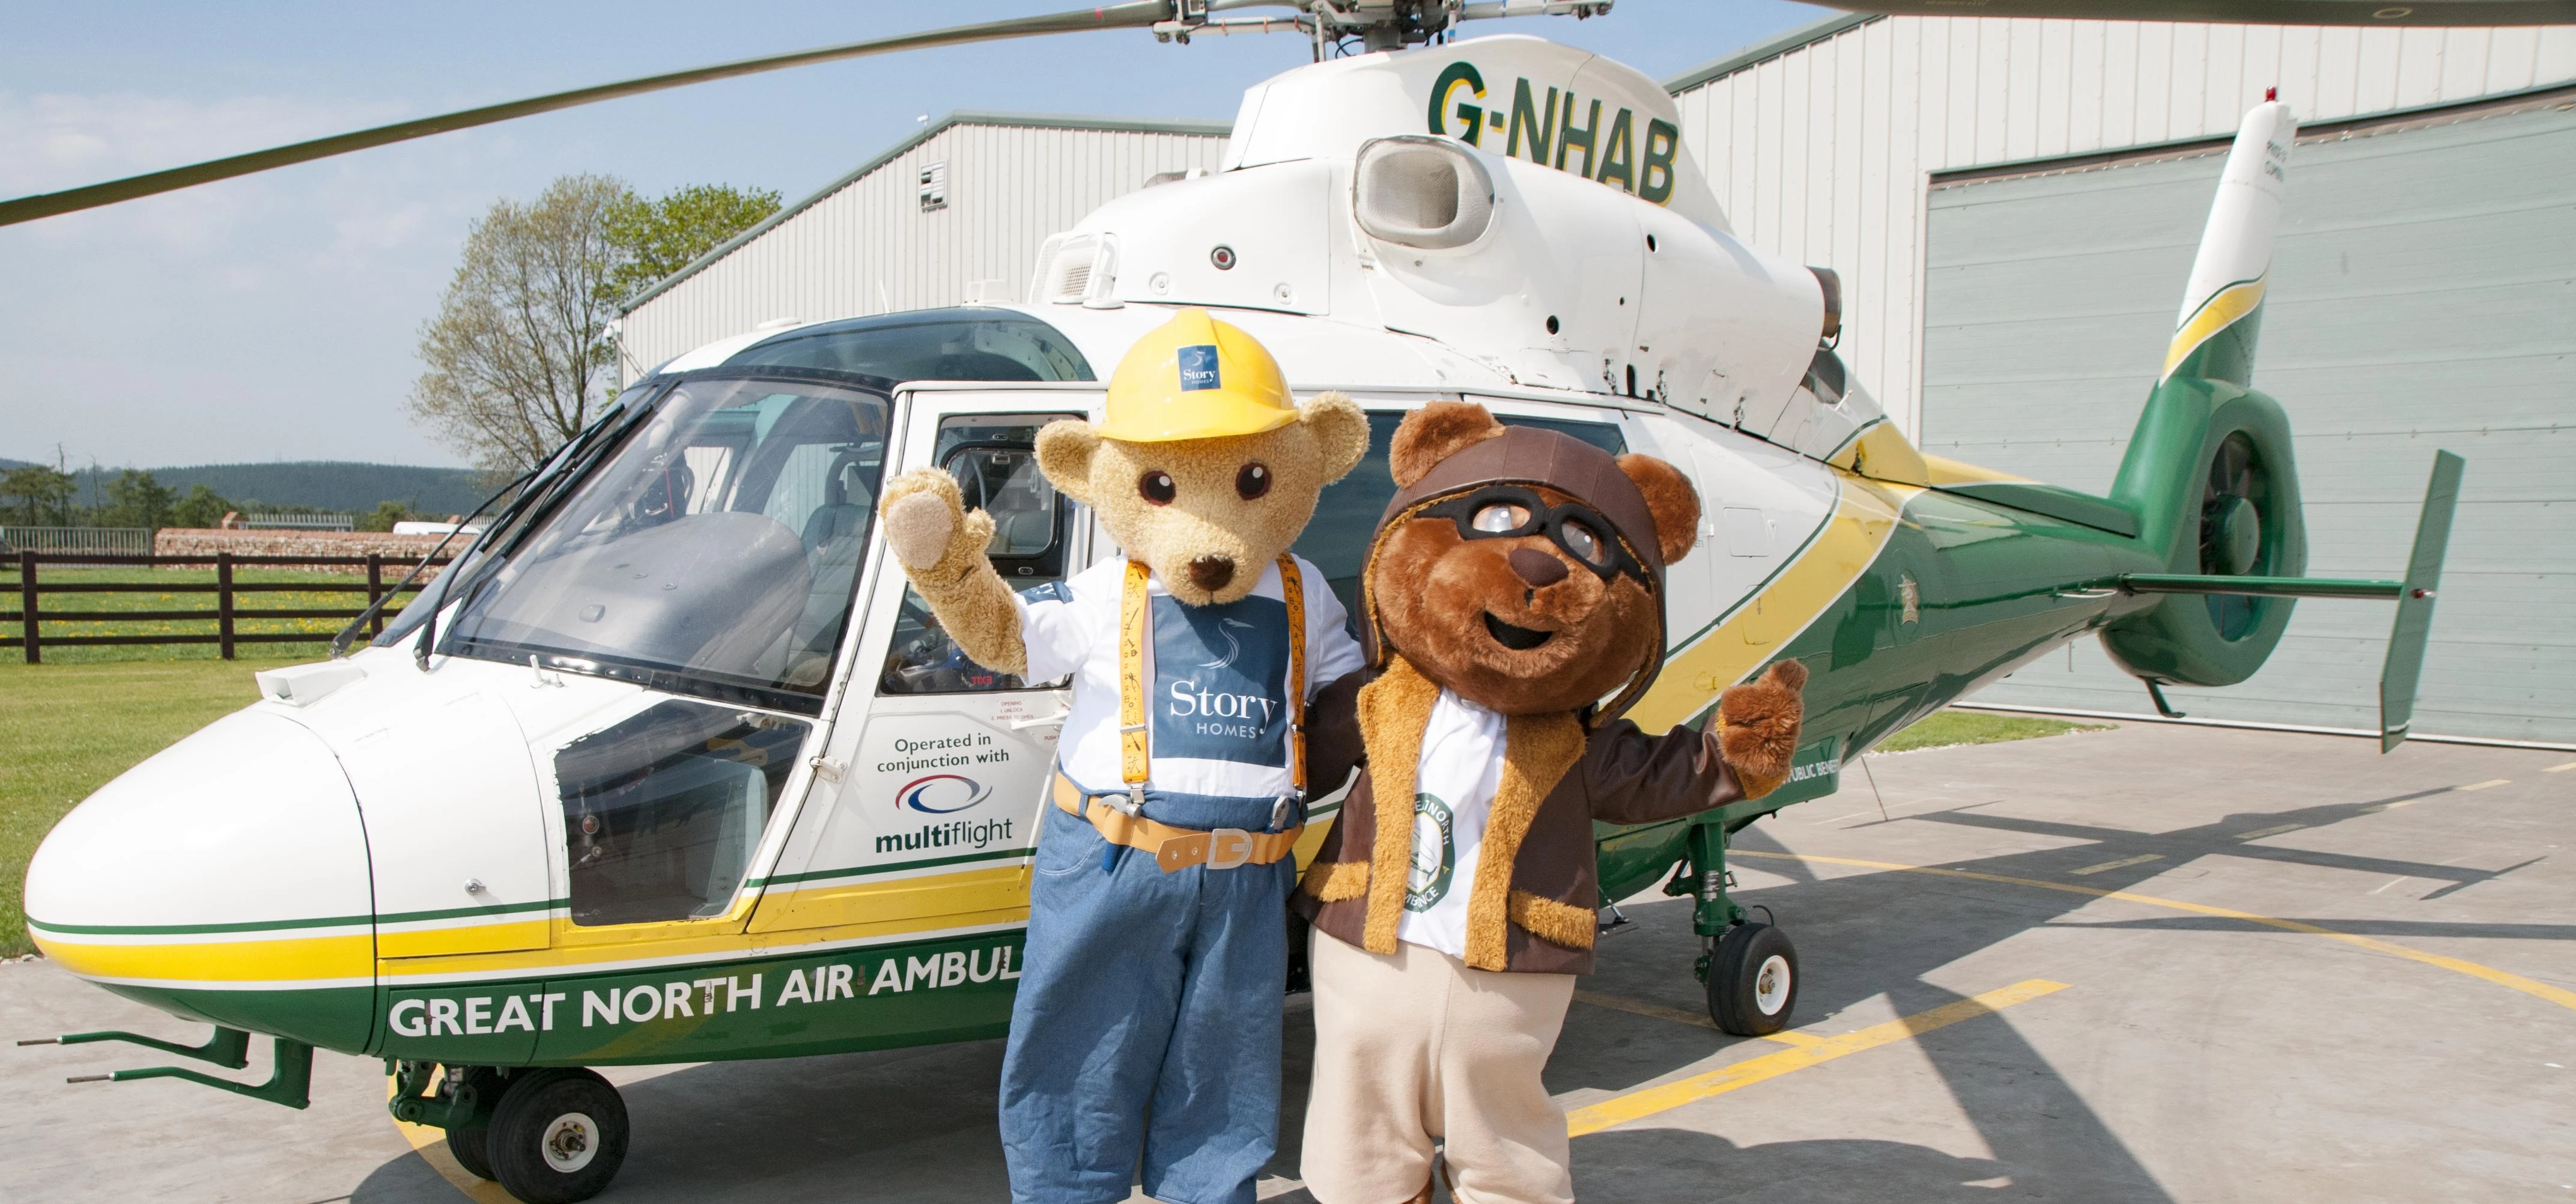 Story Homes supports the Great North Air Ambulance